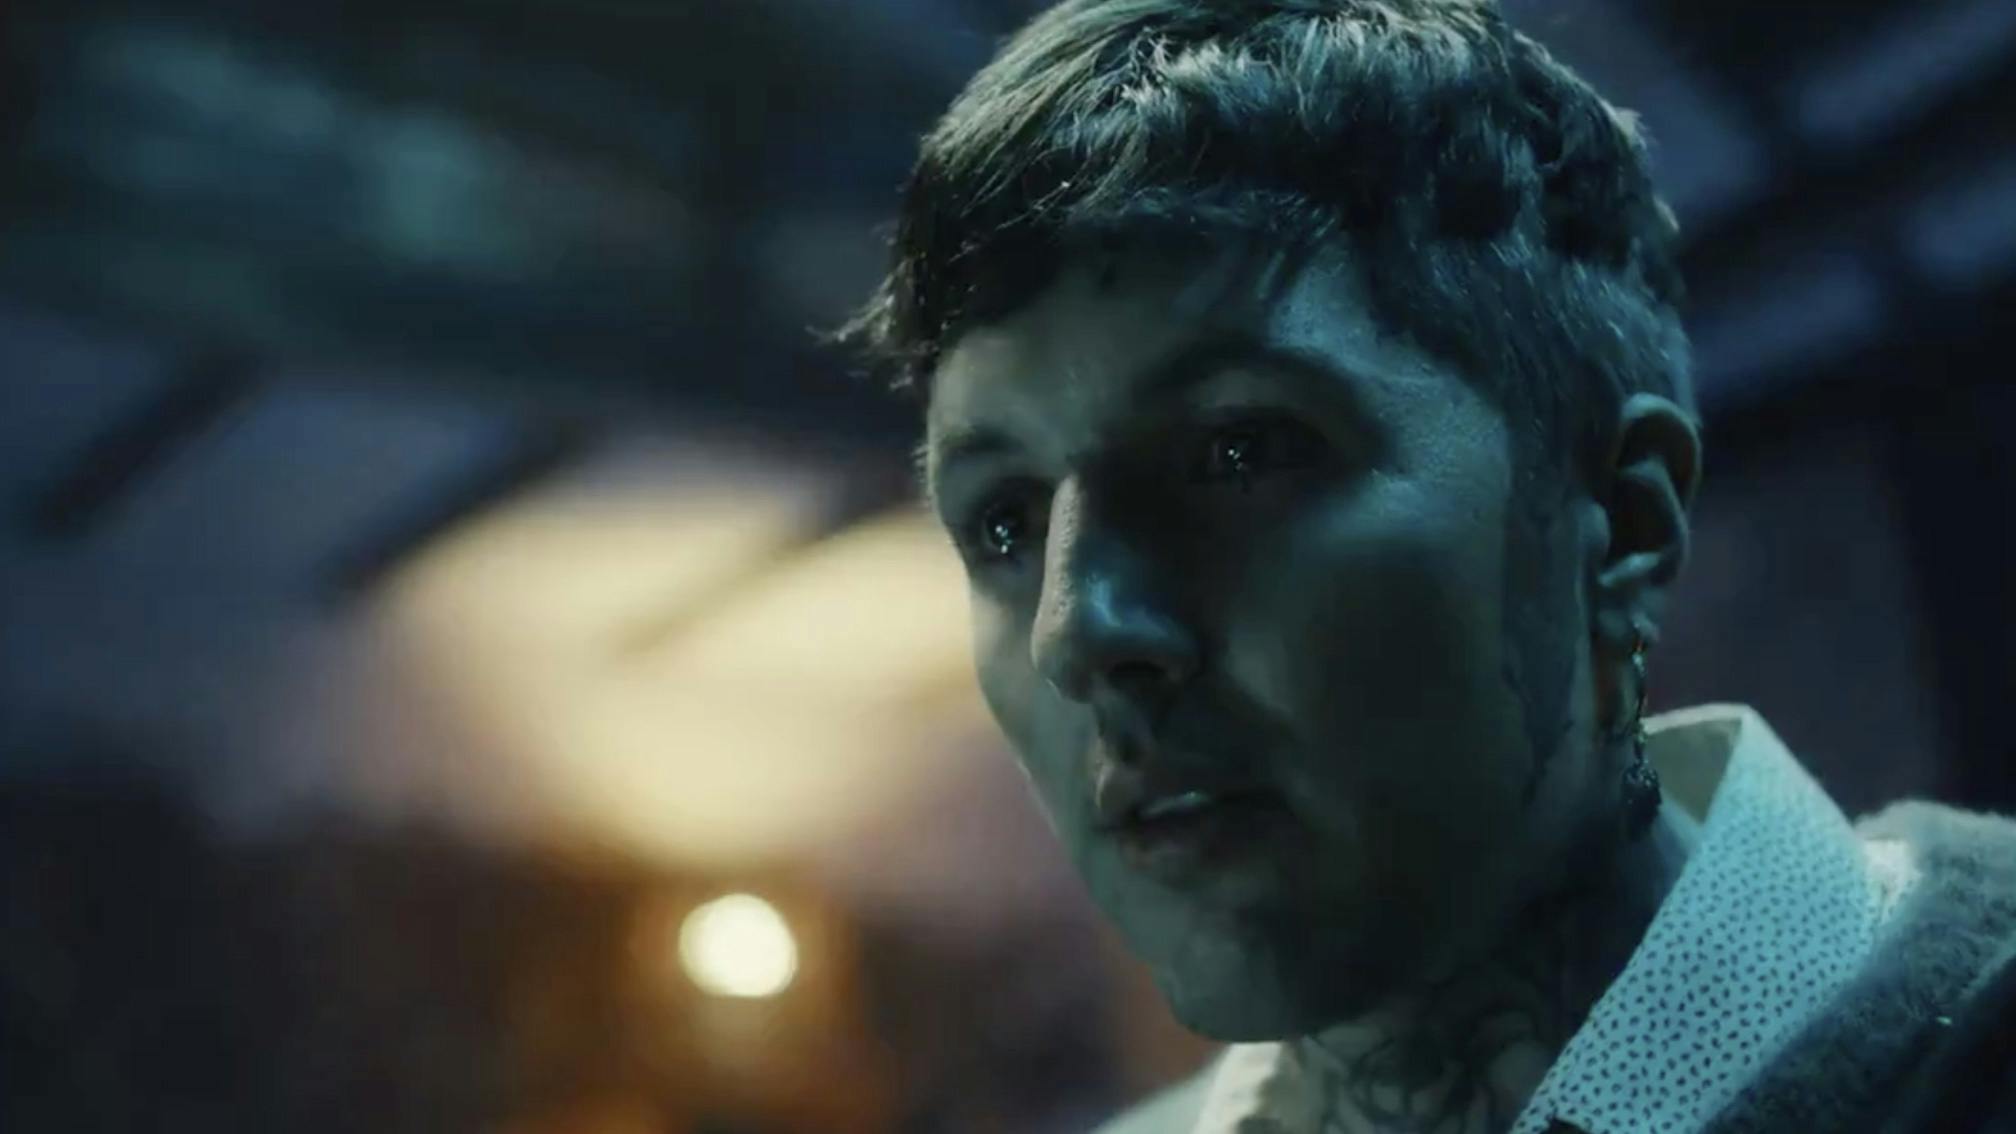 Oli Sykes: "We're Becoming So Numb To Sh*t, And It's Making Our Own Emotions Hard To Process…"